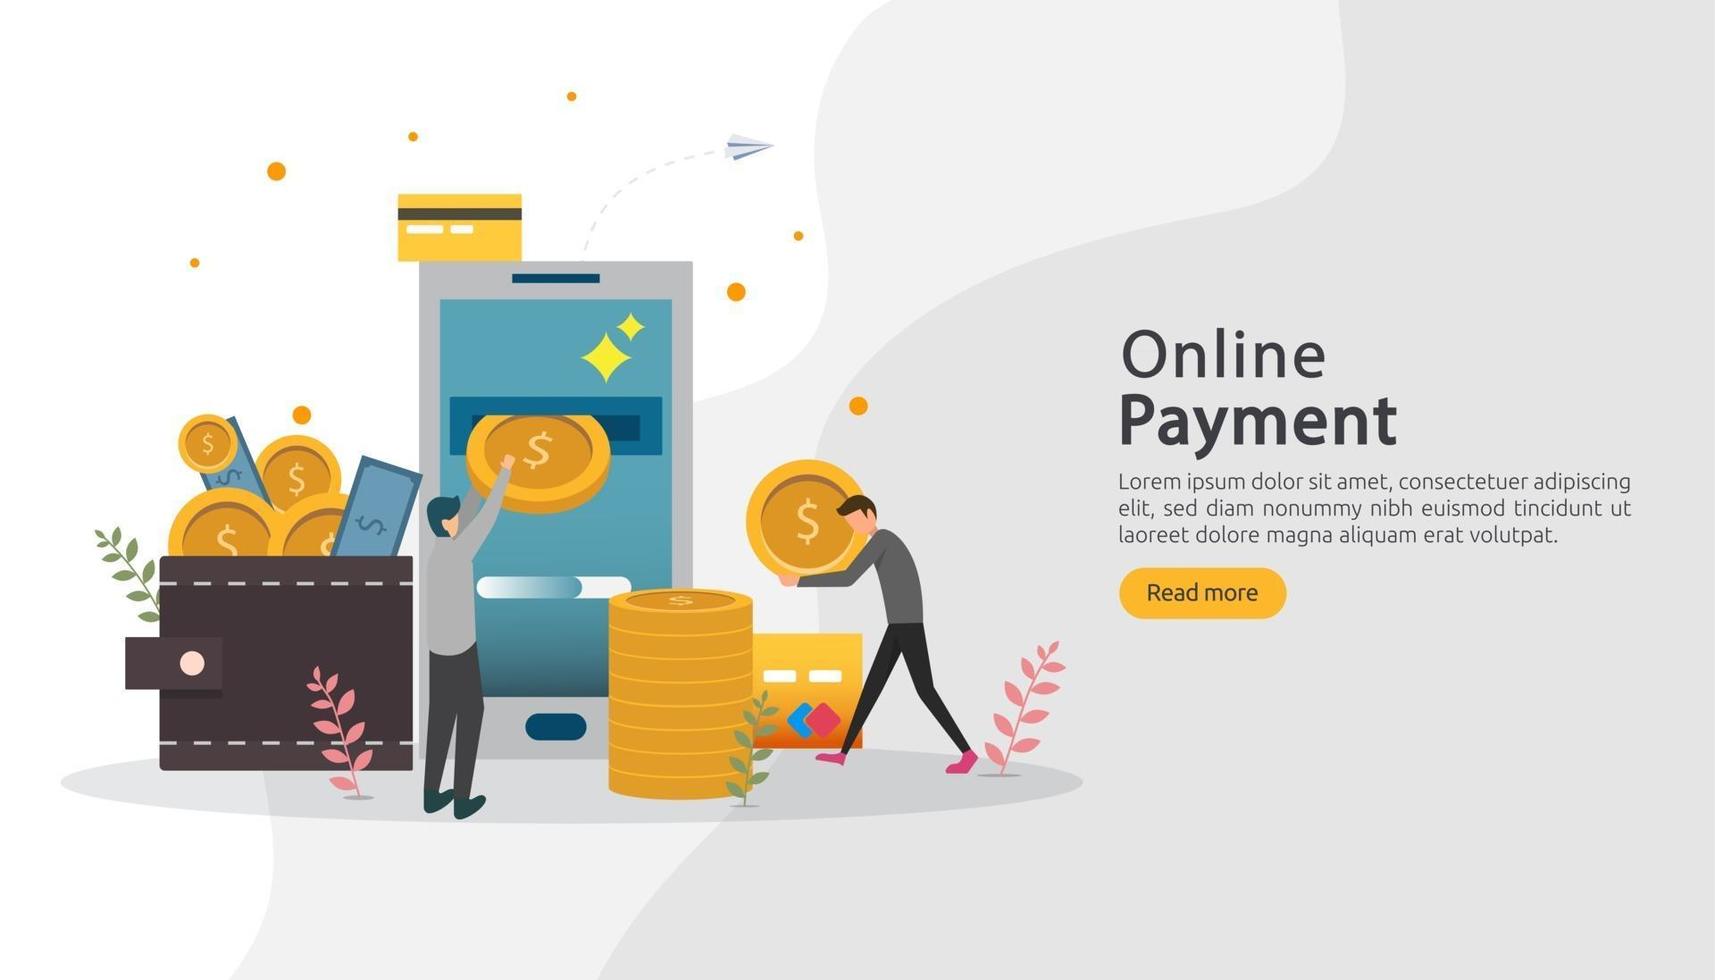 E-commerce market shopping online illustration with tiny people character. mobile payment or money transfer concept. template for web landing page, banner, presentation, social media, print media. vector